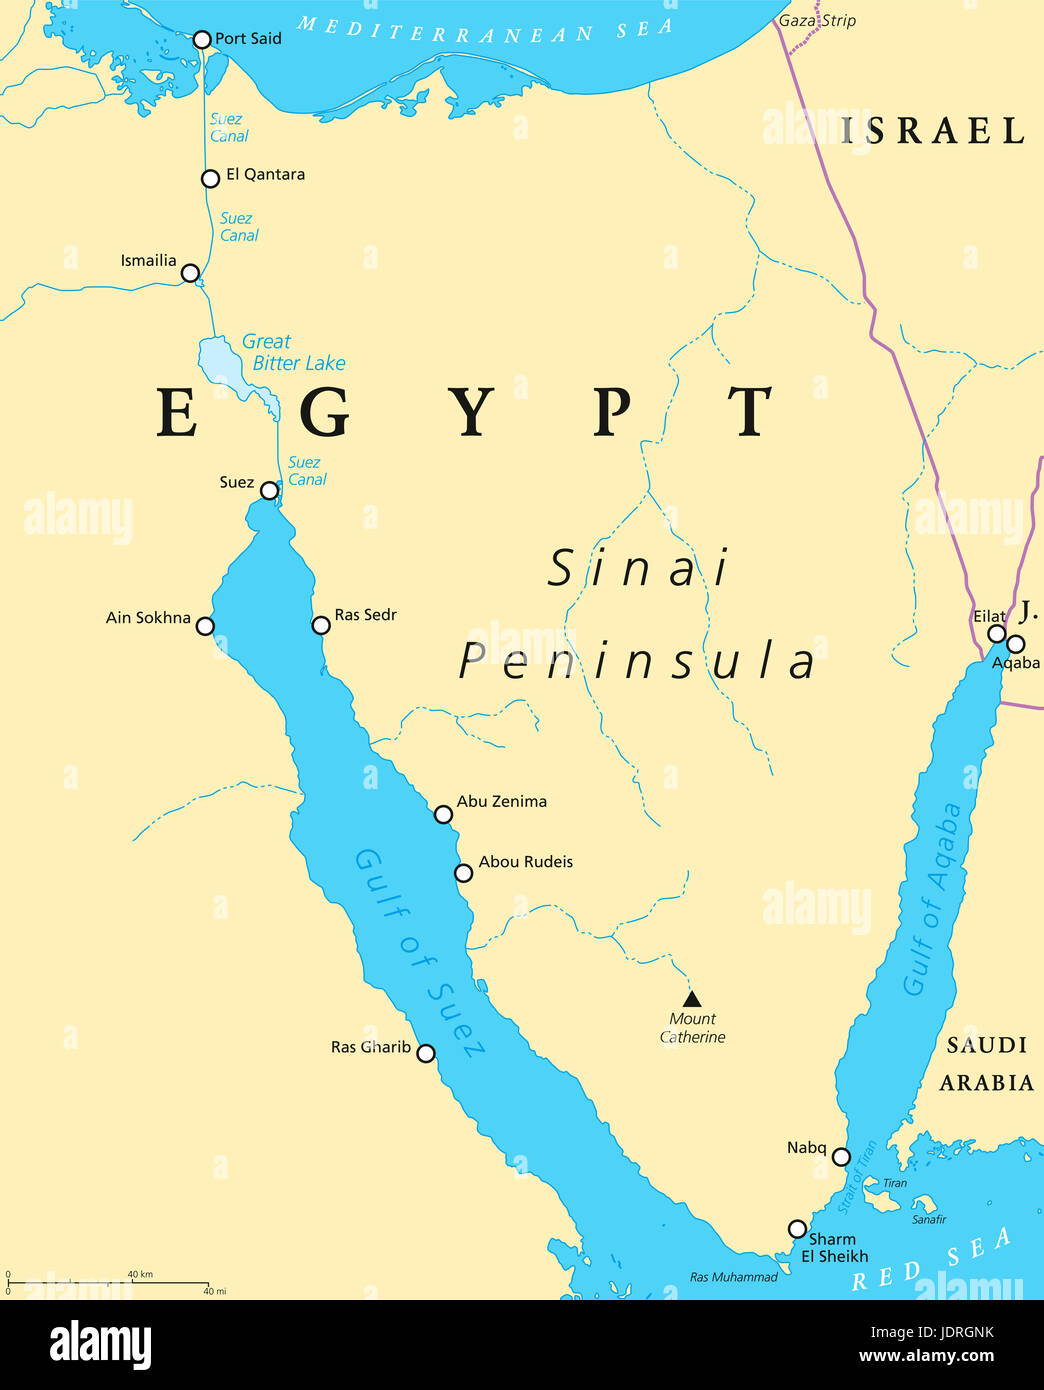 Egypt, Sinai Peninsula political map. Situated between Mediterranean Sea and Red Sea. Land bridge between Asia and Africa. Suez Canal, Gulf of Suez. Stock Photo